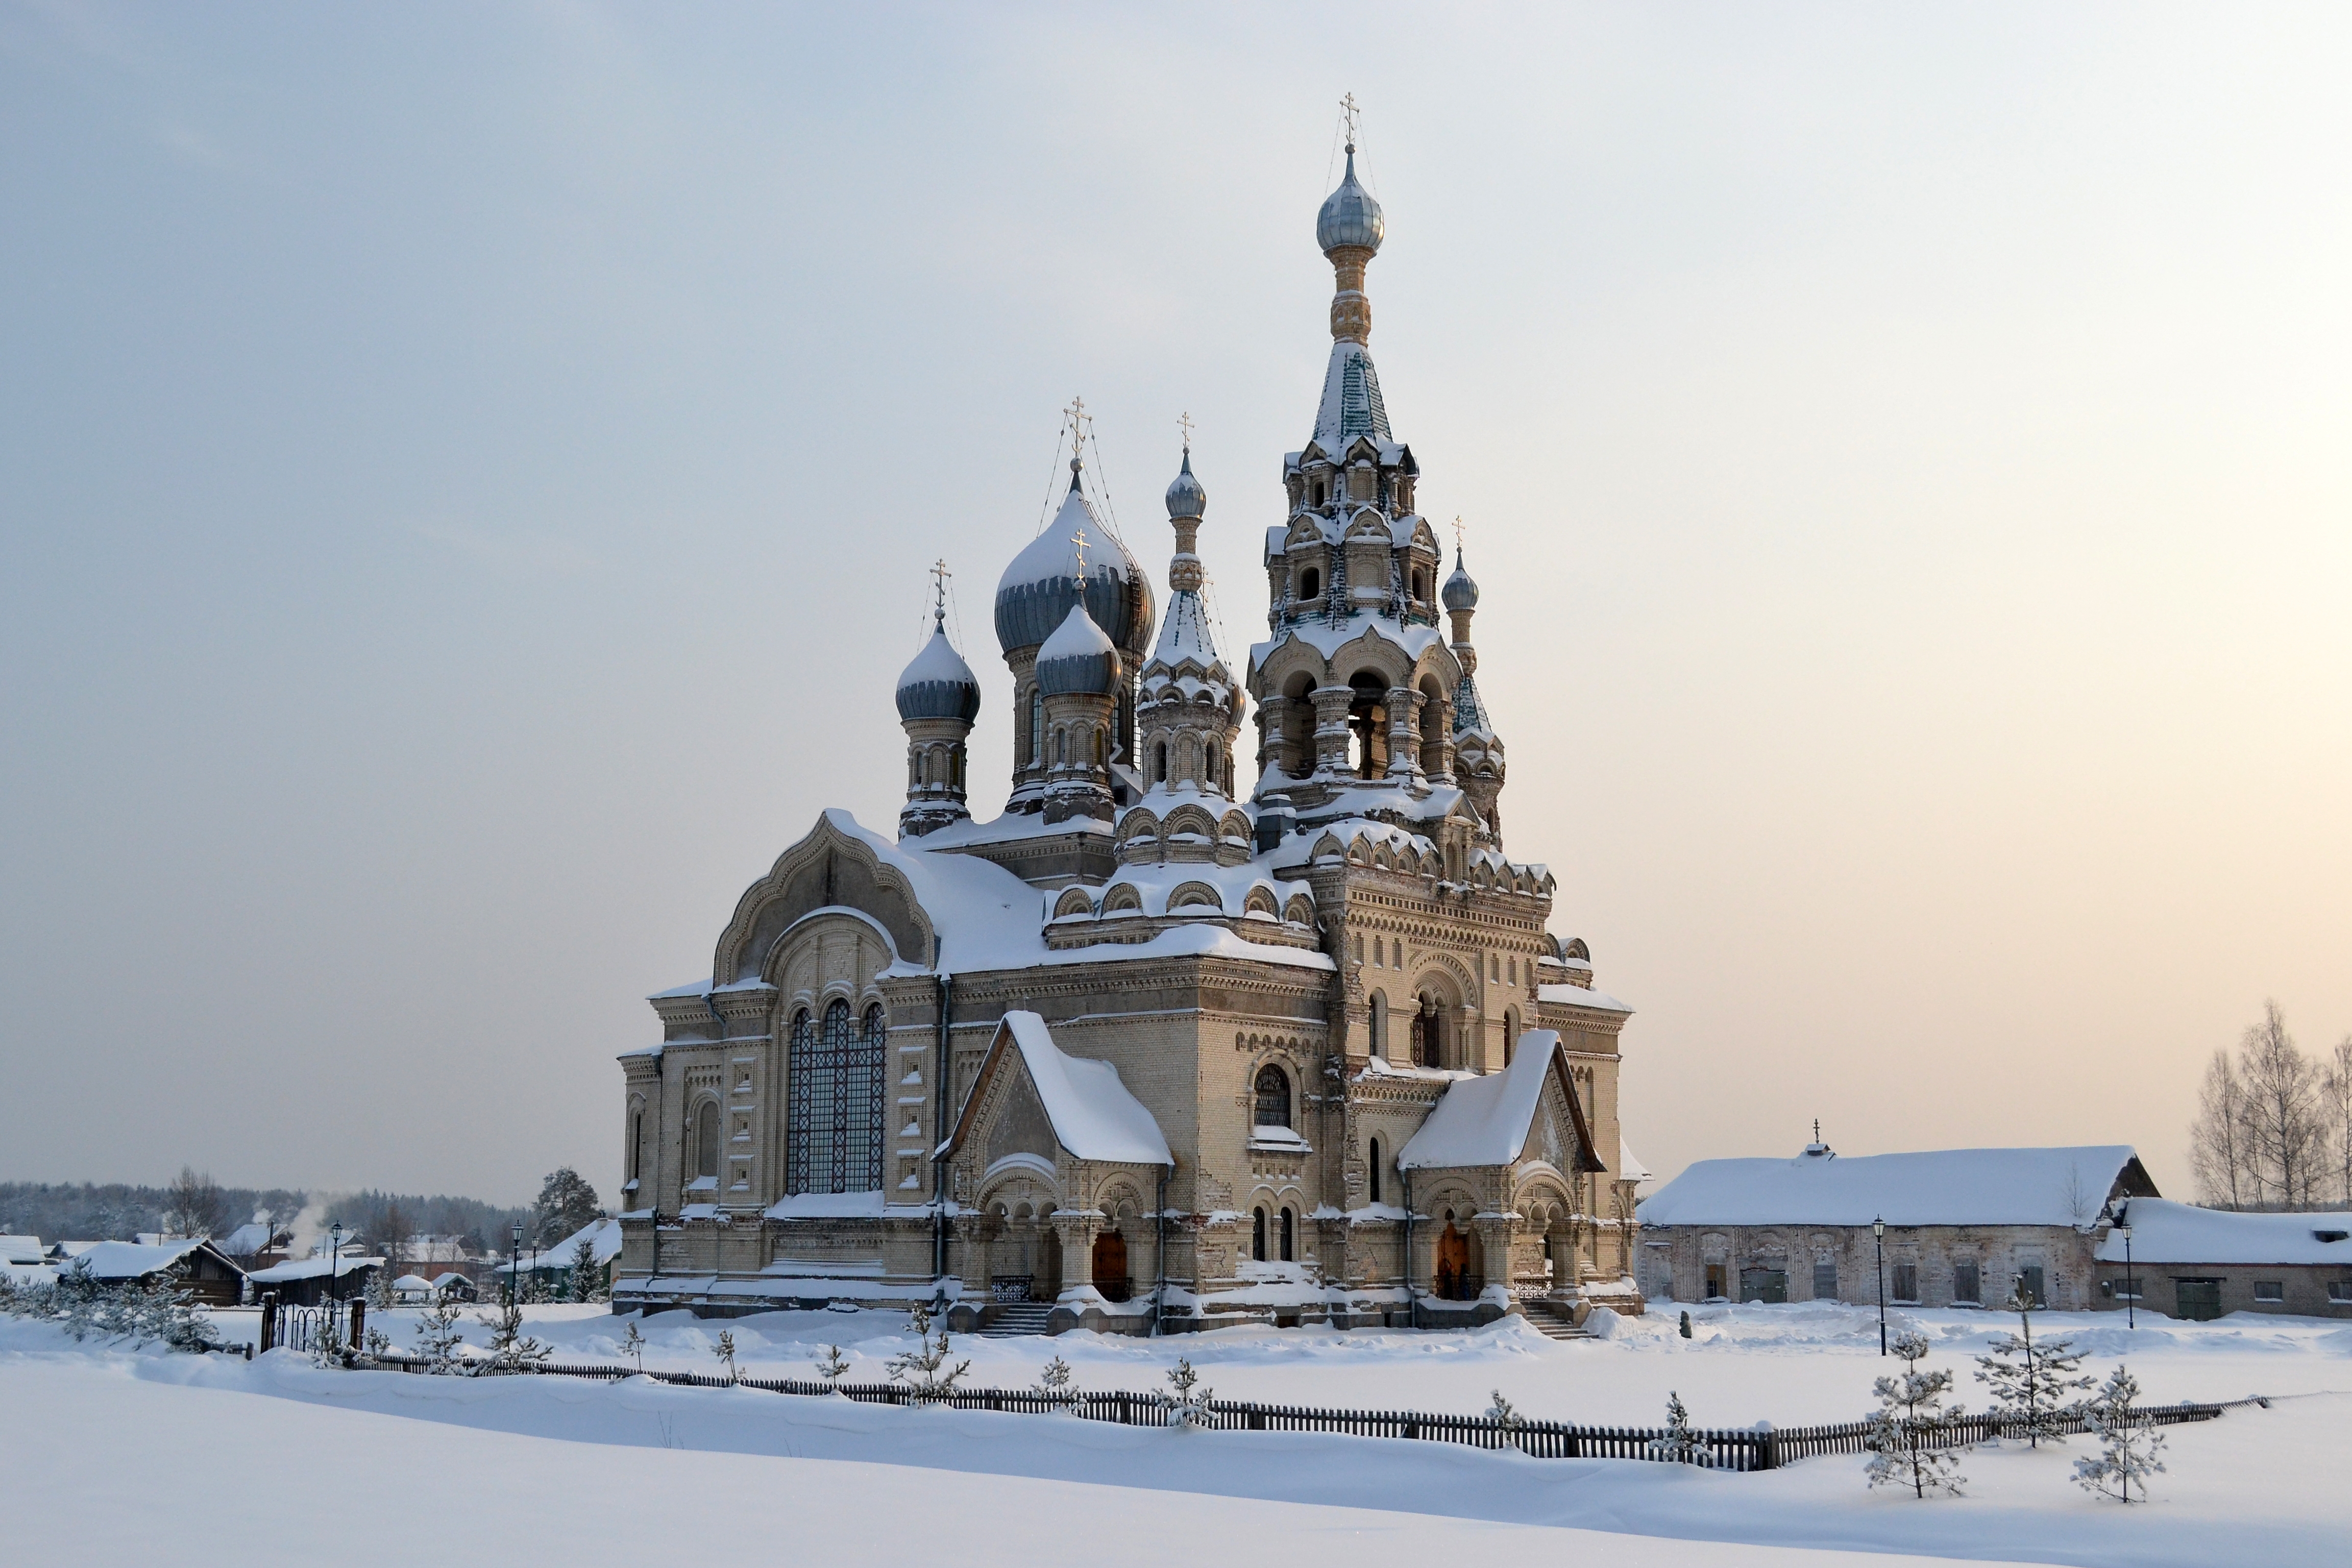 Cool Backgrounds snow, spassky temple, cold, kukoboy village Temple